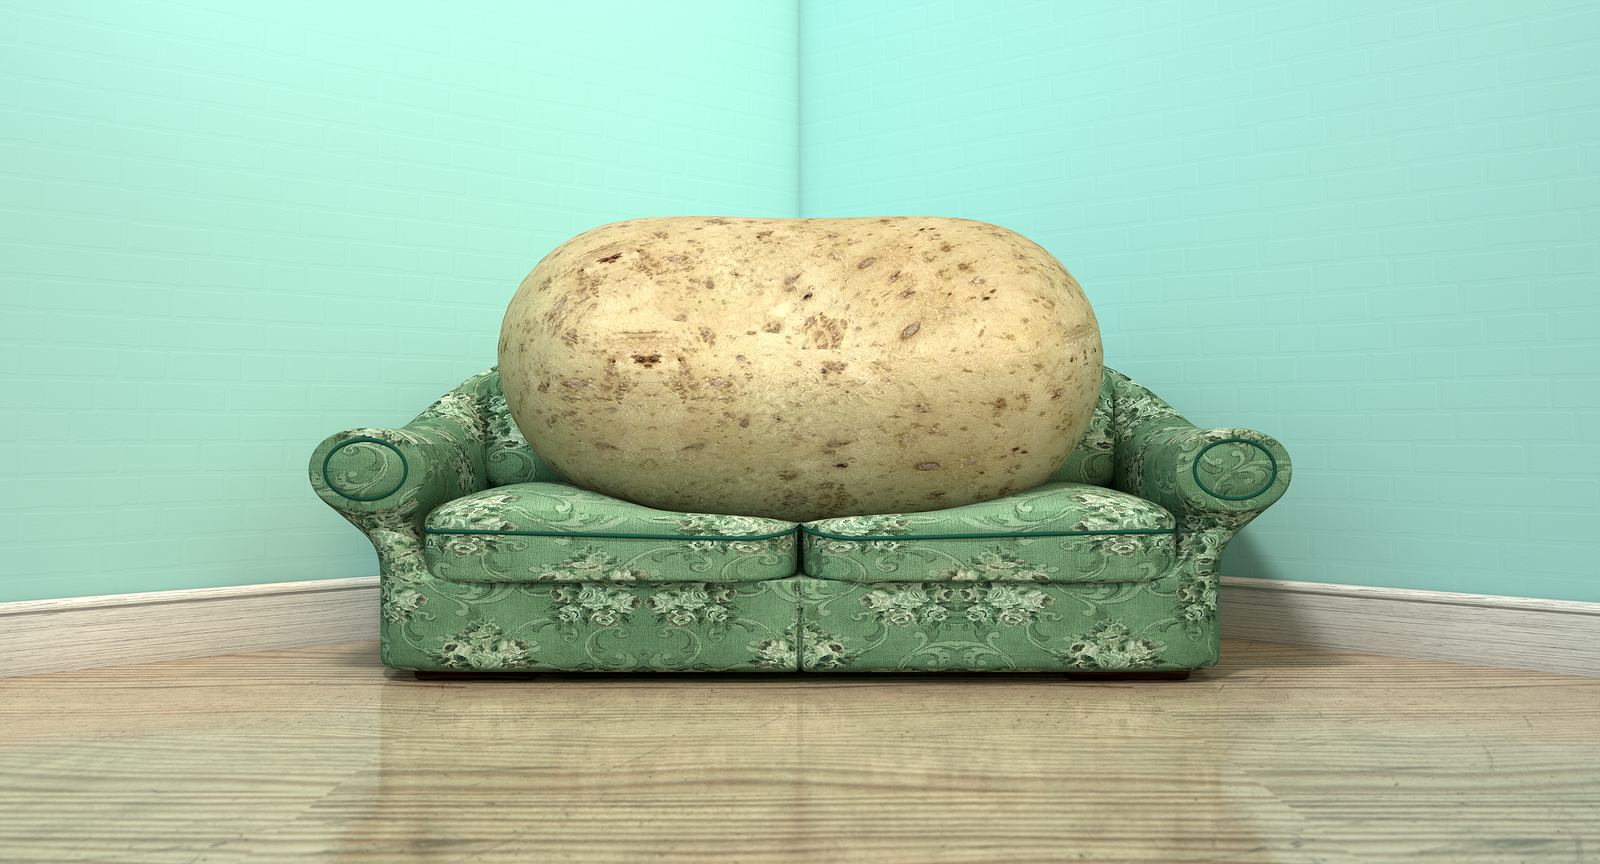 Couch Potato On Old Sofa